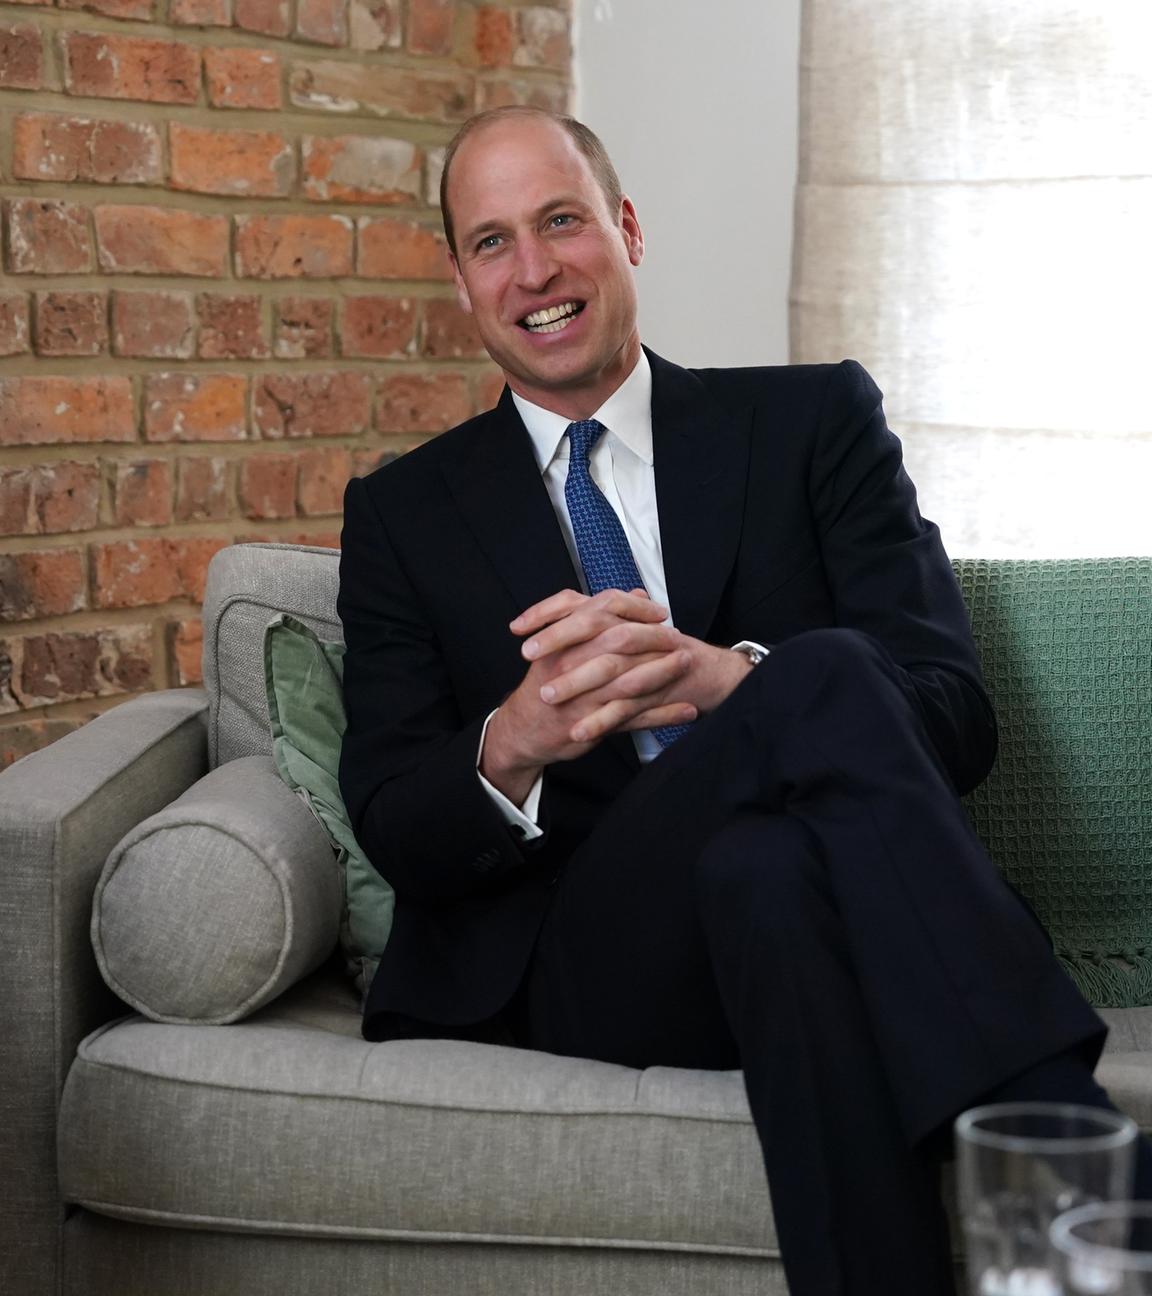 Prinz William besucht "James' Place" in Newcastle